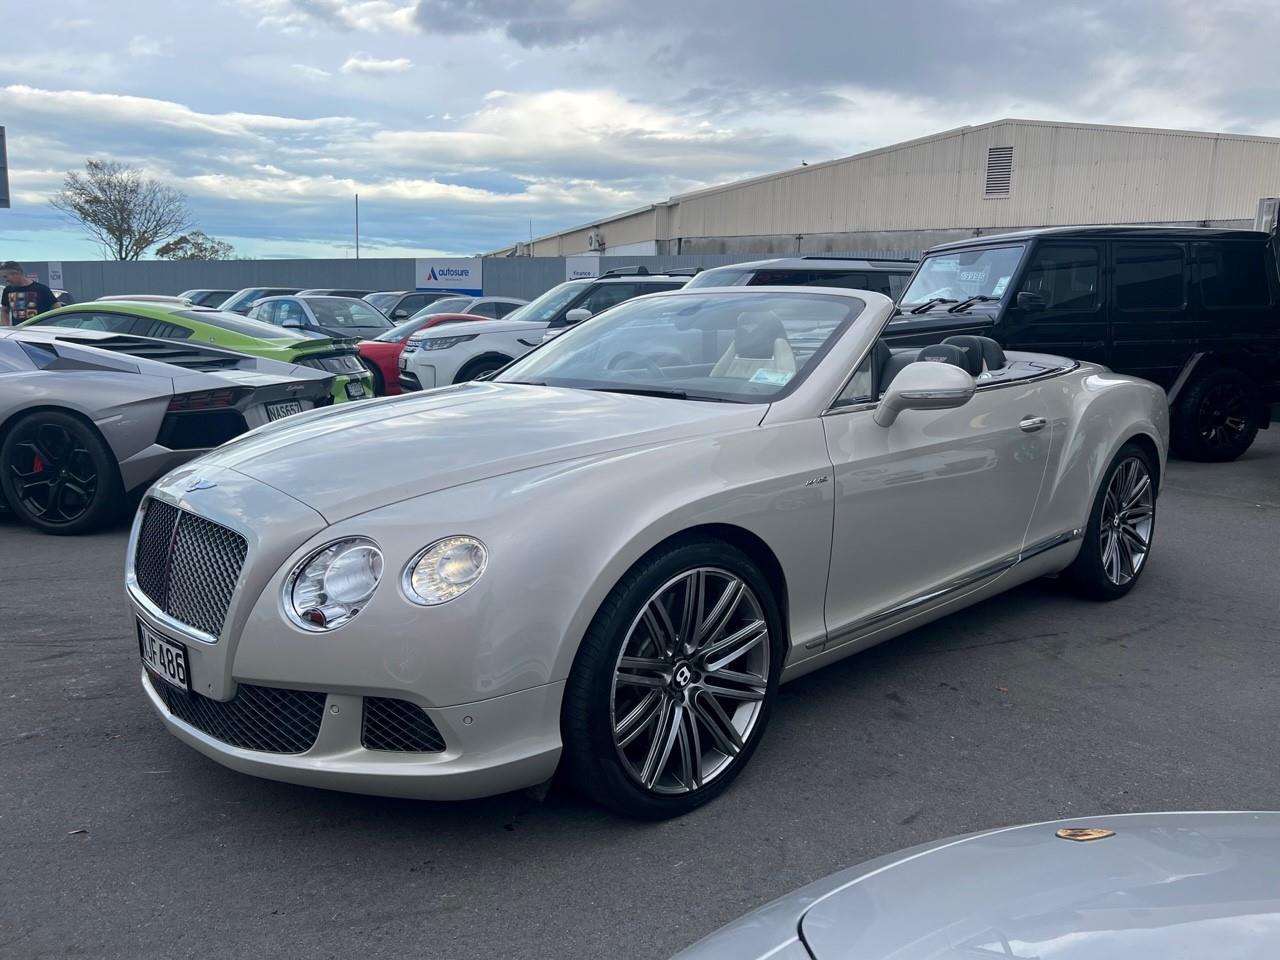 image-2, 2014 Bentley Continental GTC Speed Facelift Mullin at Christchurch